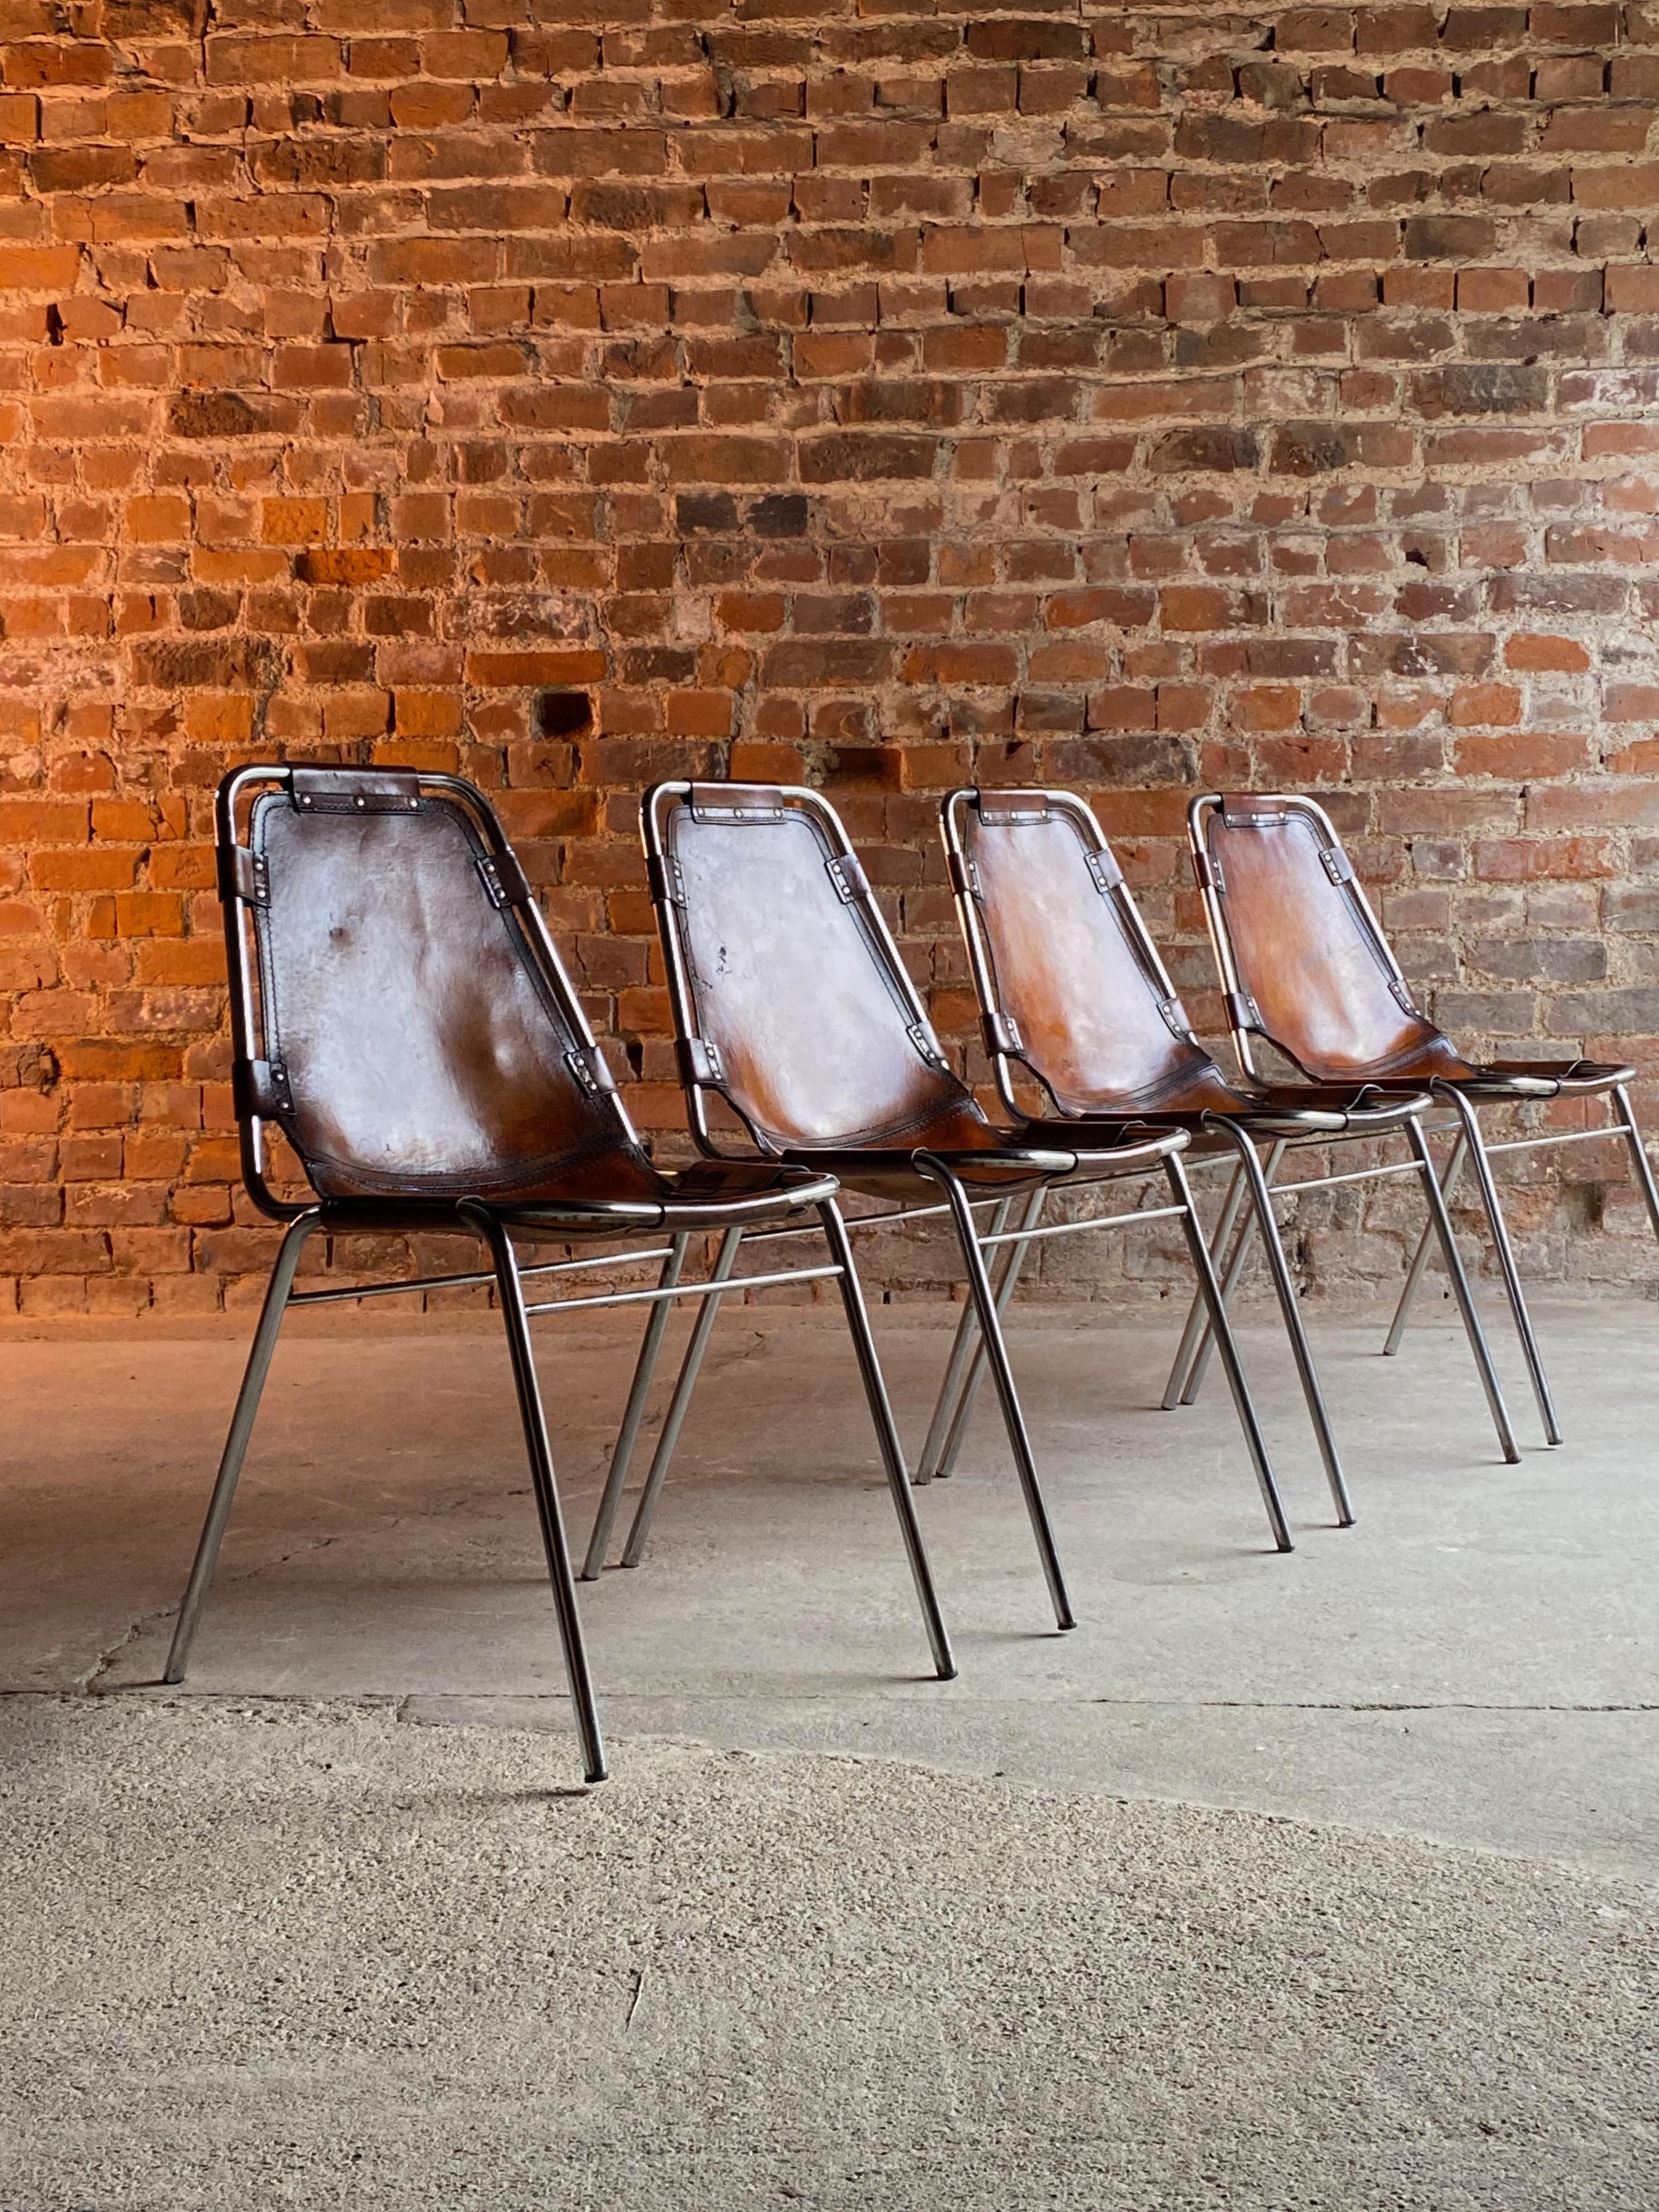 Charlotte Perriand dining chairs leather 4 Les Arcs 1970s set no: 2

Heavily patinated set of four tan leather 'Les Arcs' dining chairs designed by Charlotte Perriand for Cassina in the 1960s for the Les Arcs ski resort,  each chair consists of a